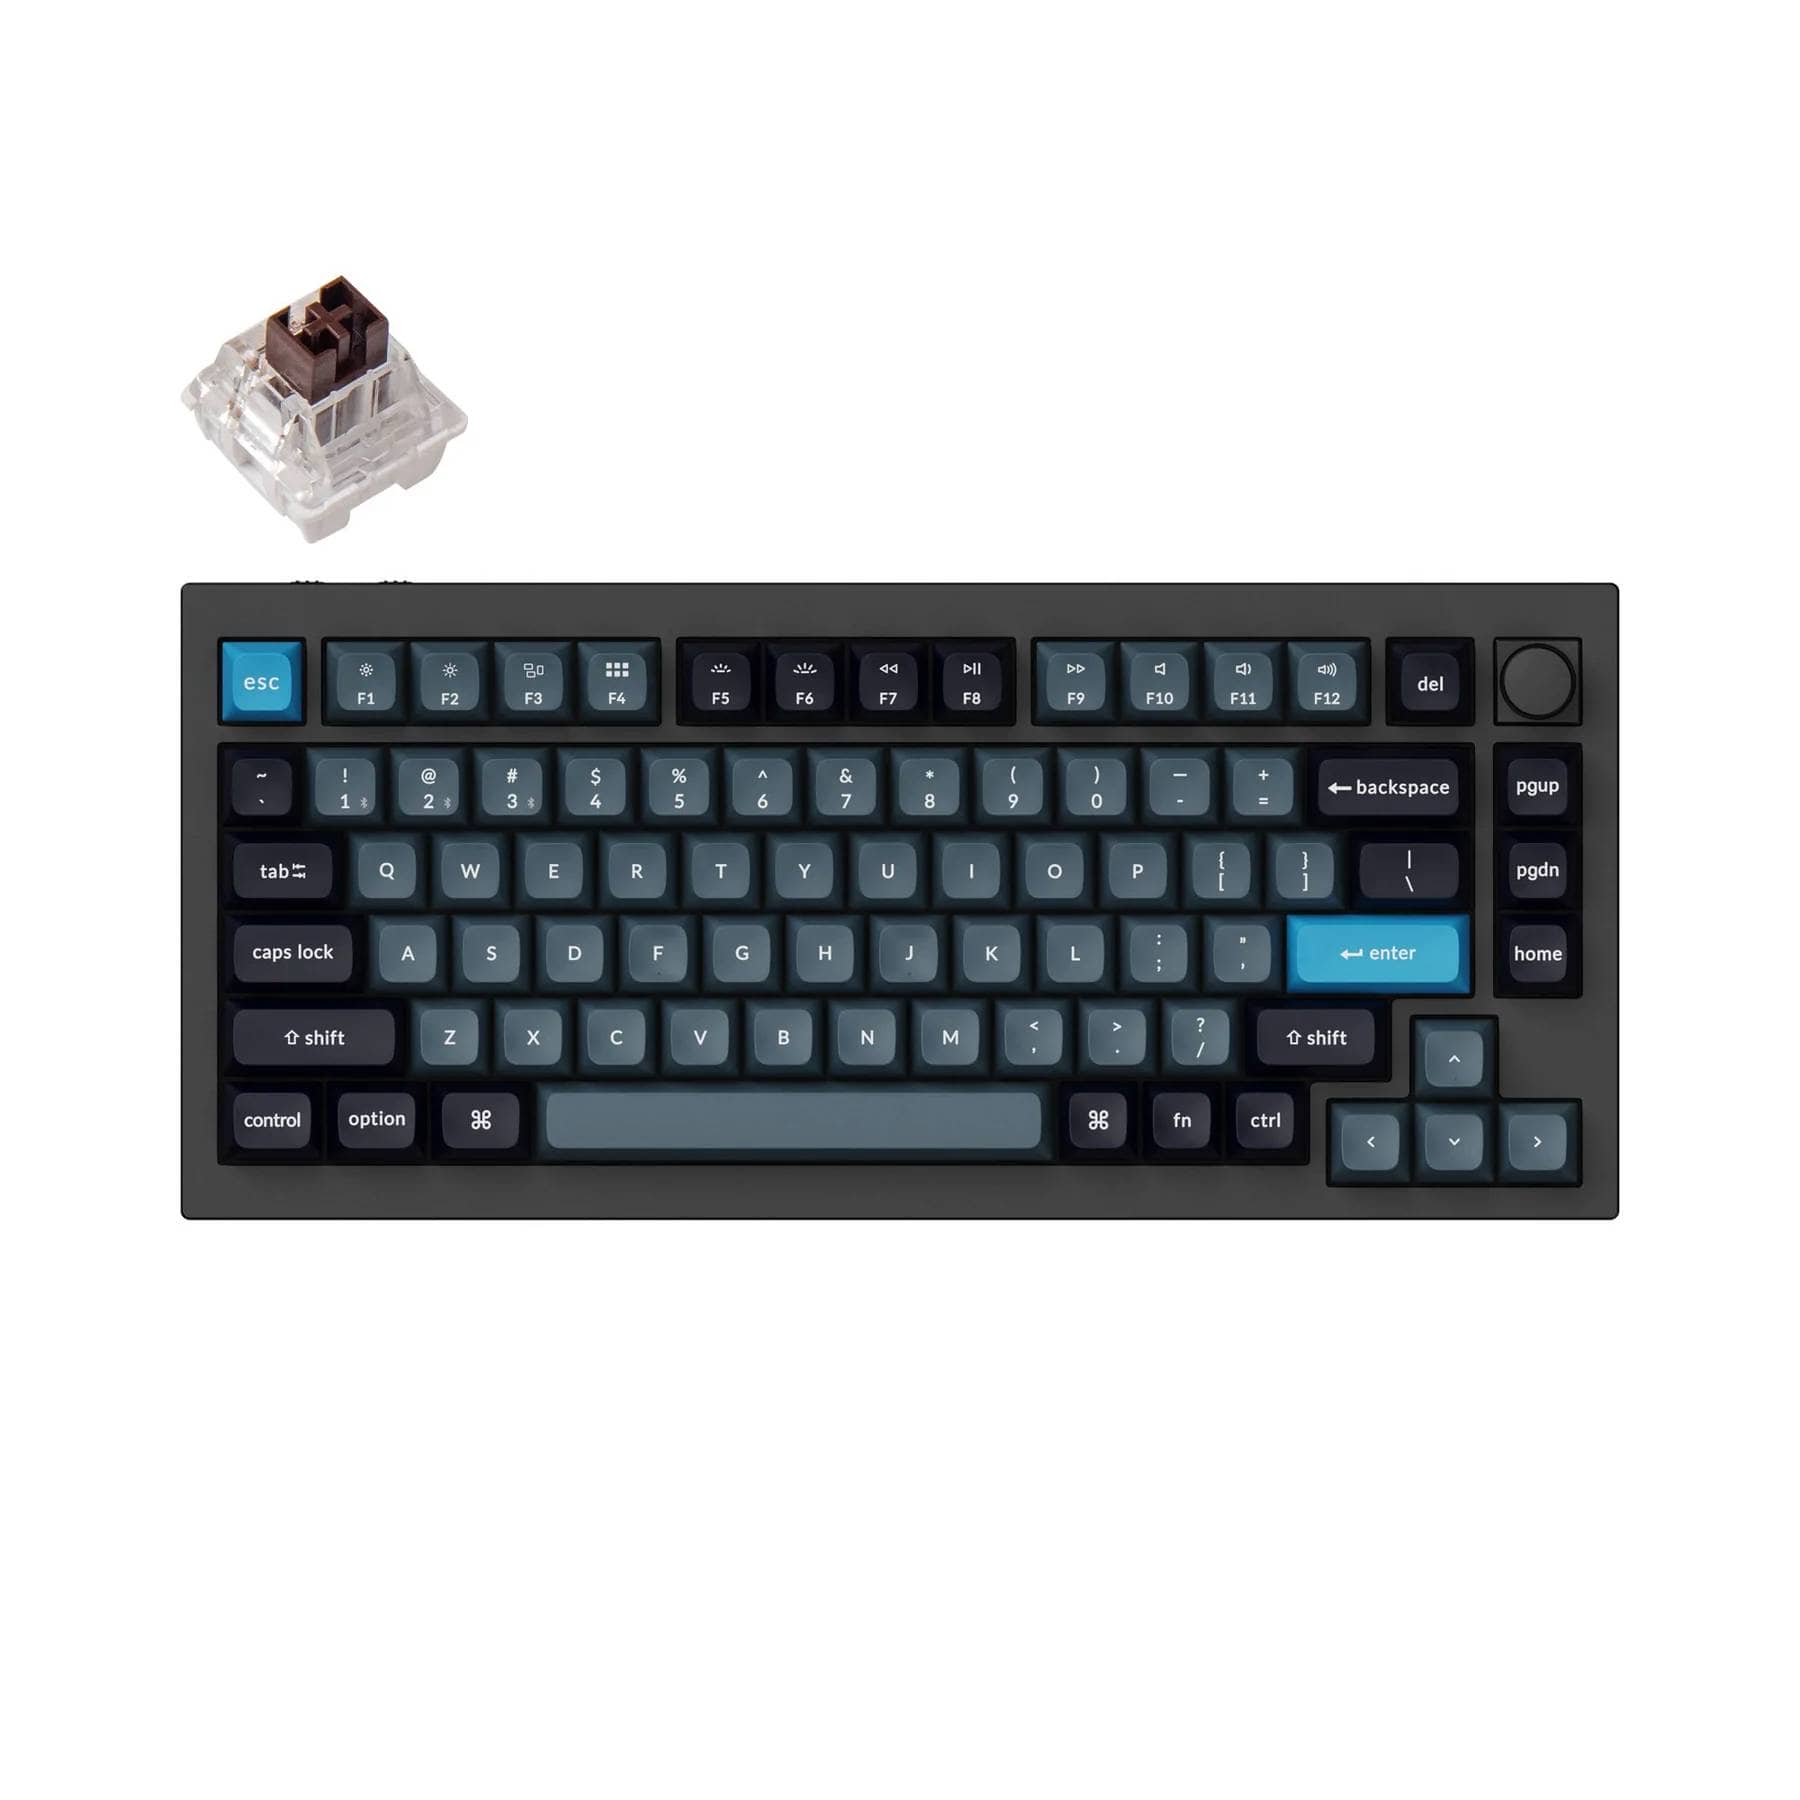 Keychron Q1 Pro QMK VIA wireless custom mechanical keyboard 75 layout full aluminum black frame for Mac WIndows Linux with RGB backlight and hot swappable K Pro switch